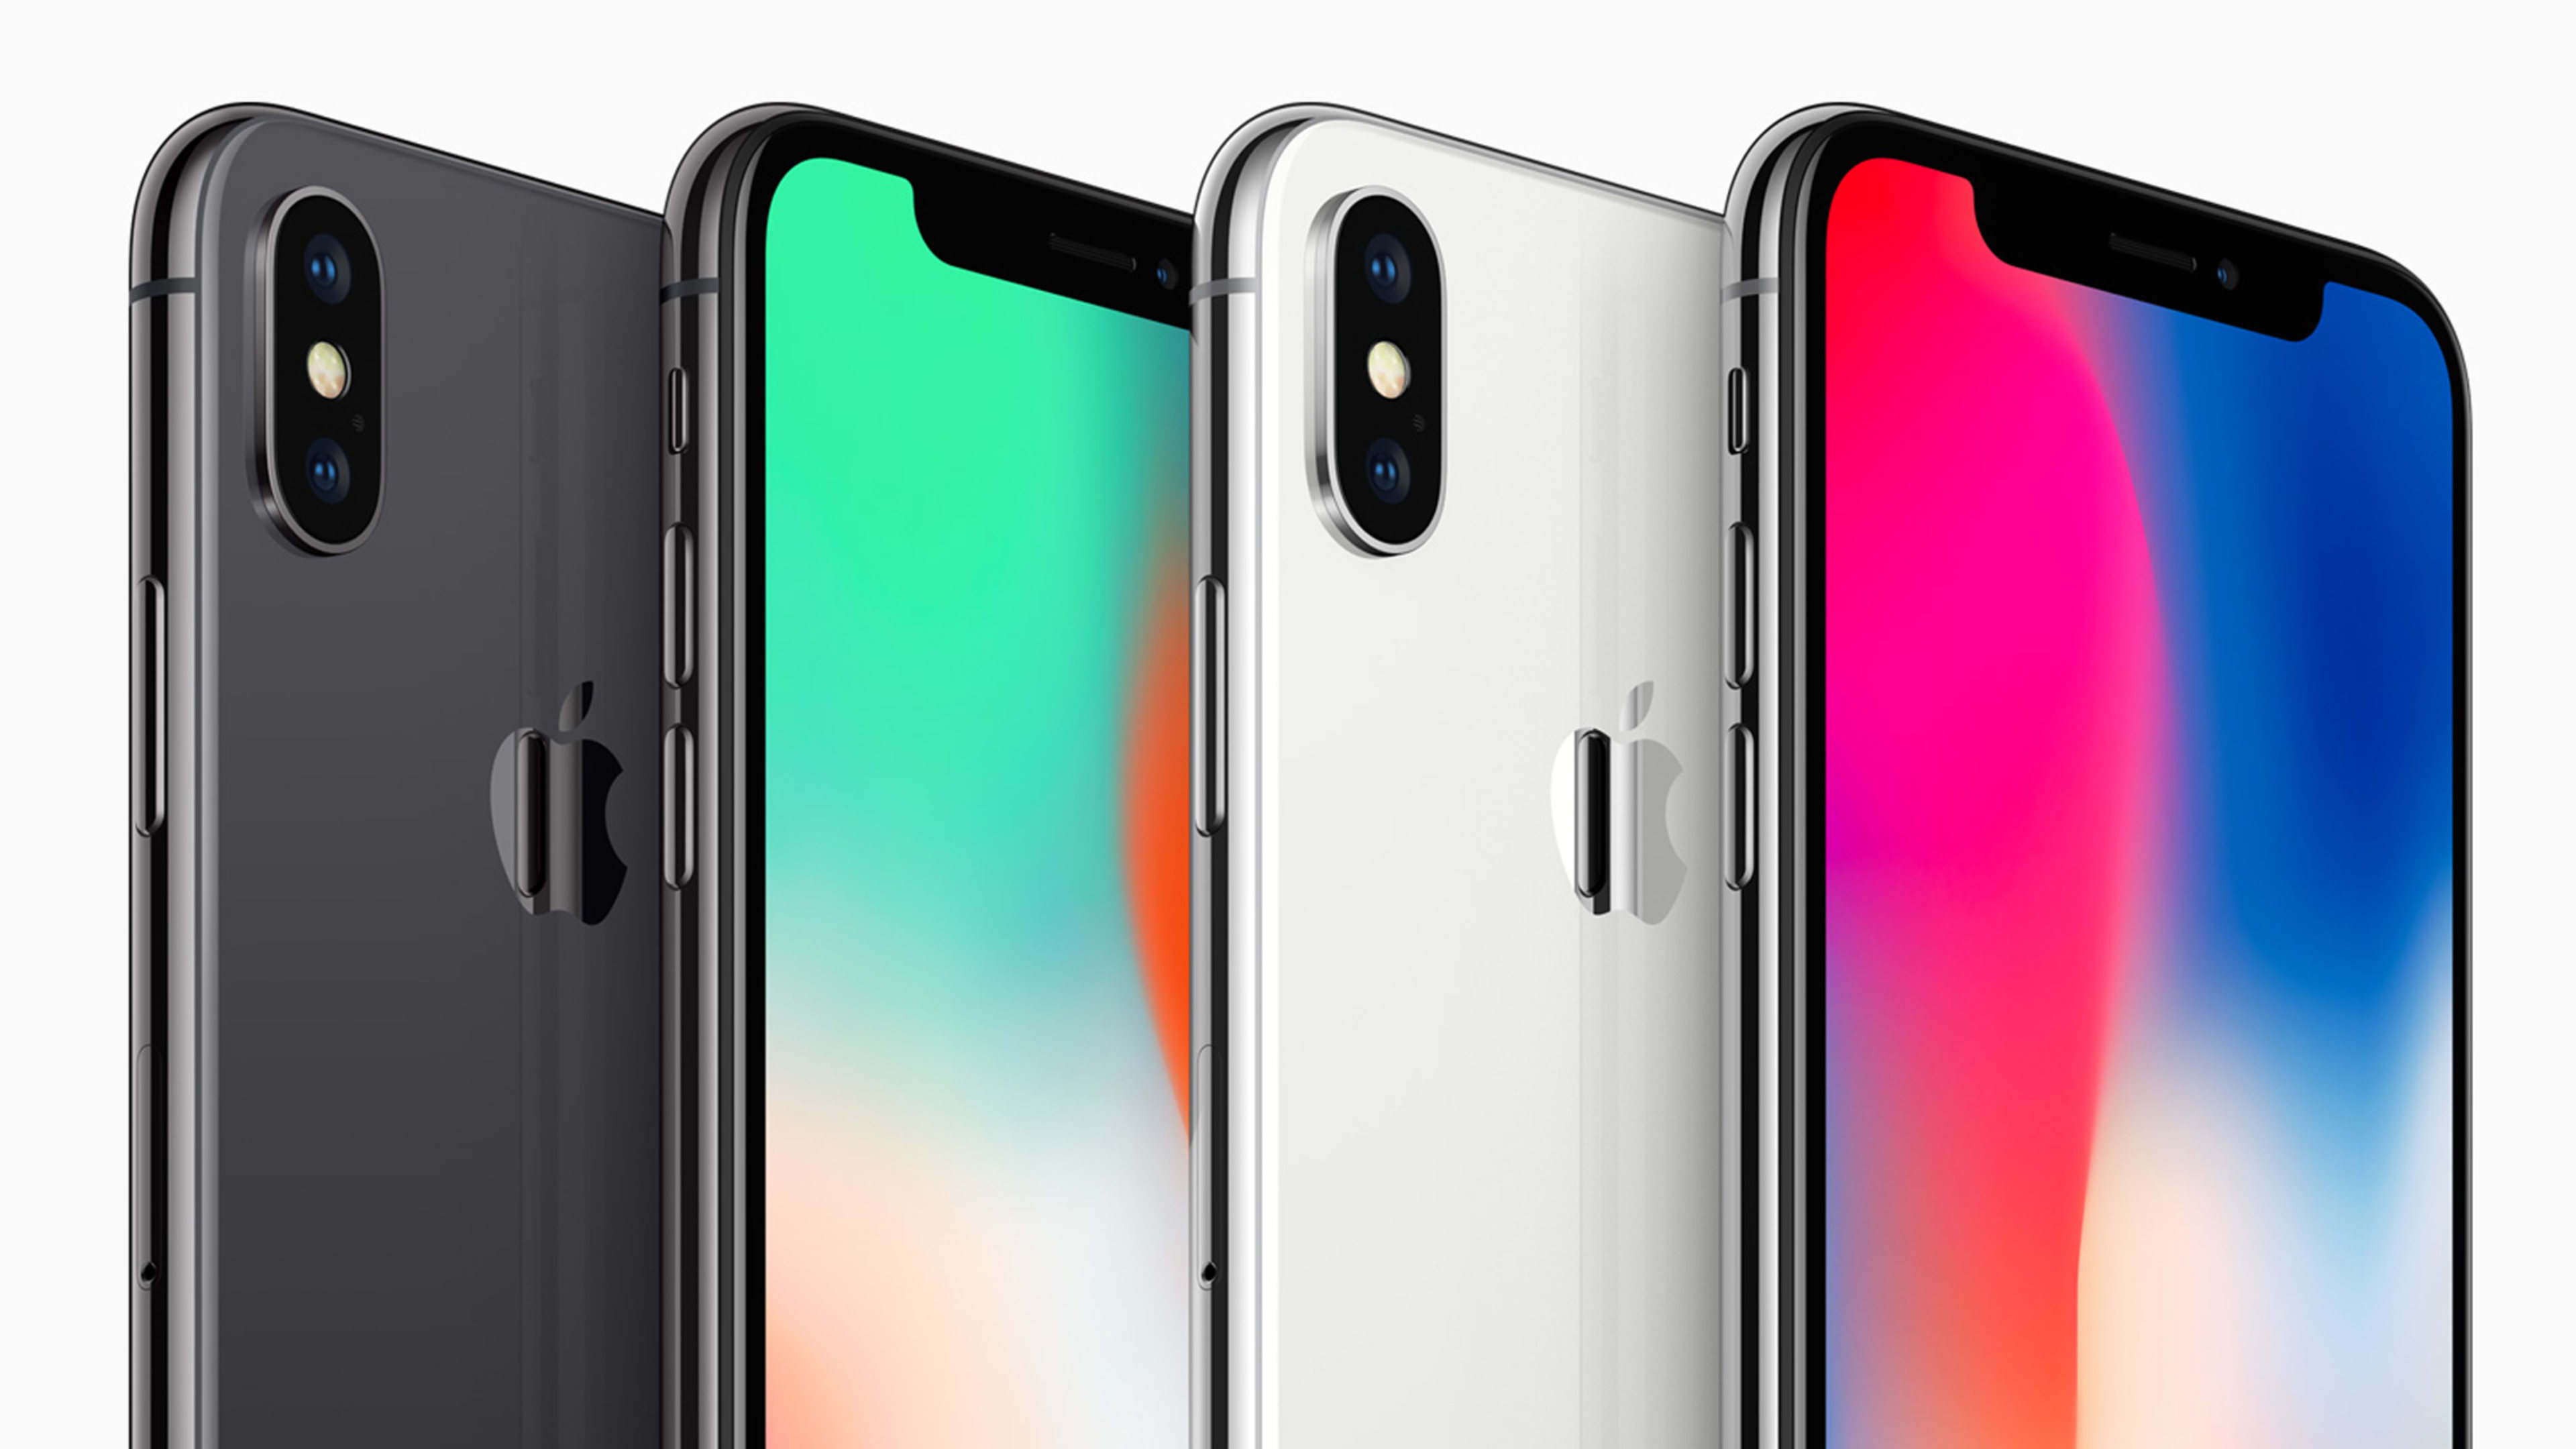 Apple’s iPhone X will be severely constrained at launch